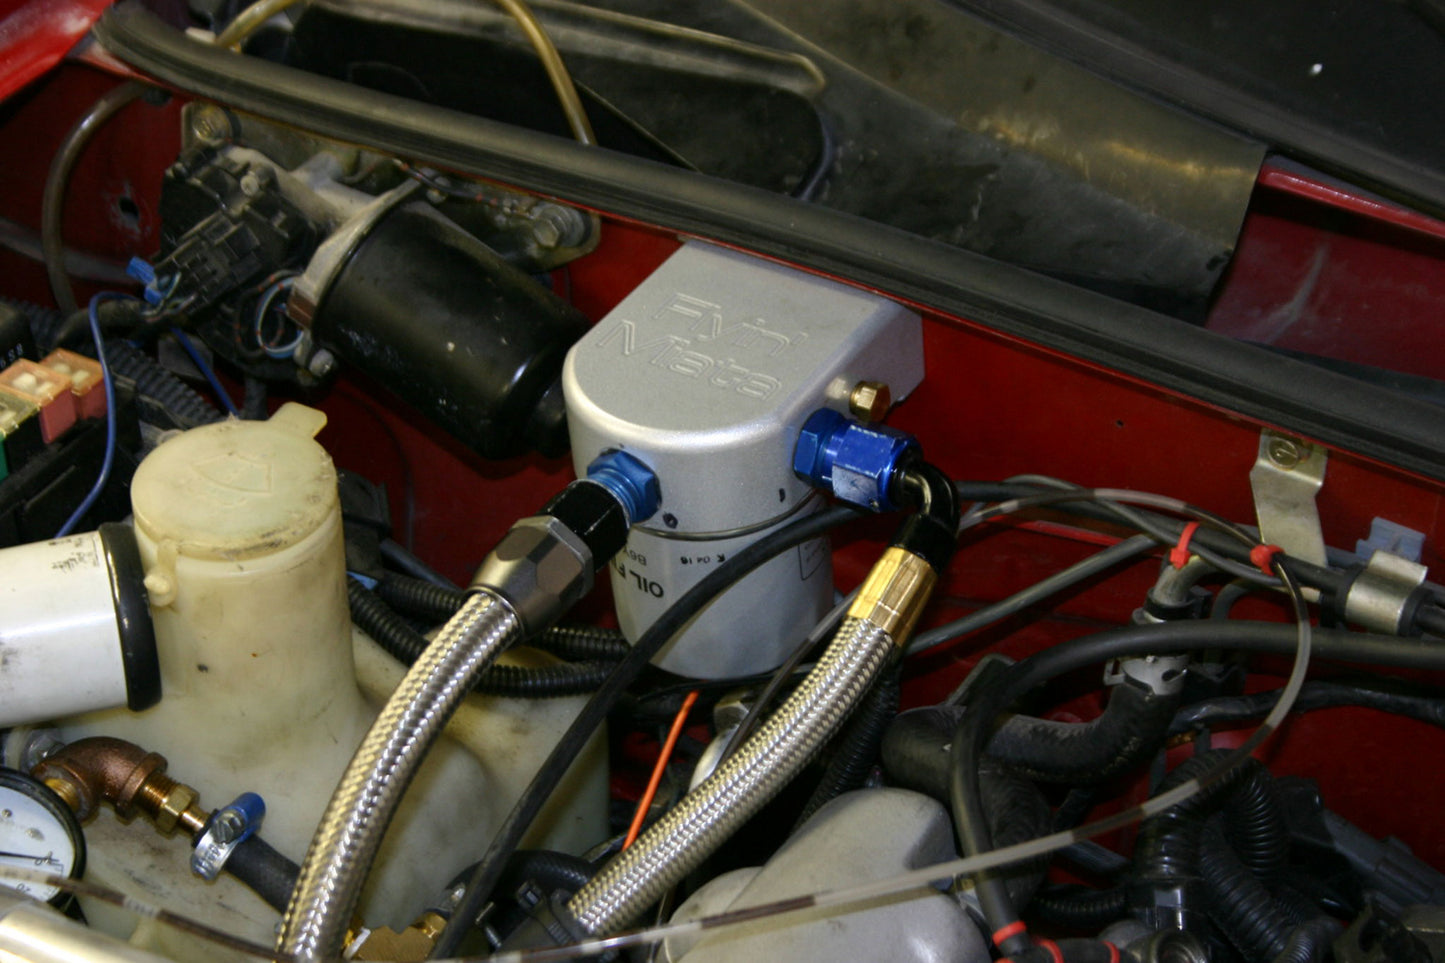 FM oil filter relocation kit (NA and NB chassis)